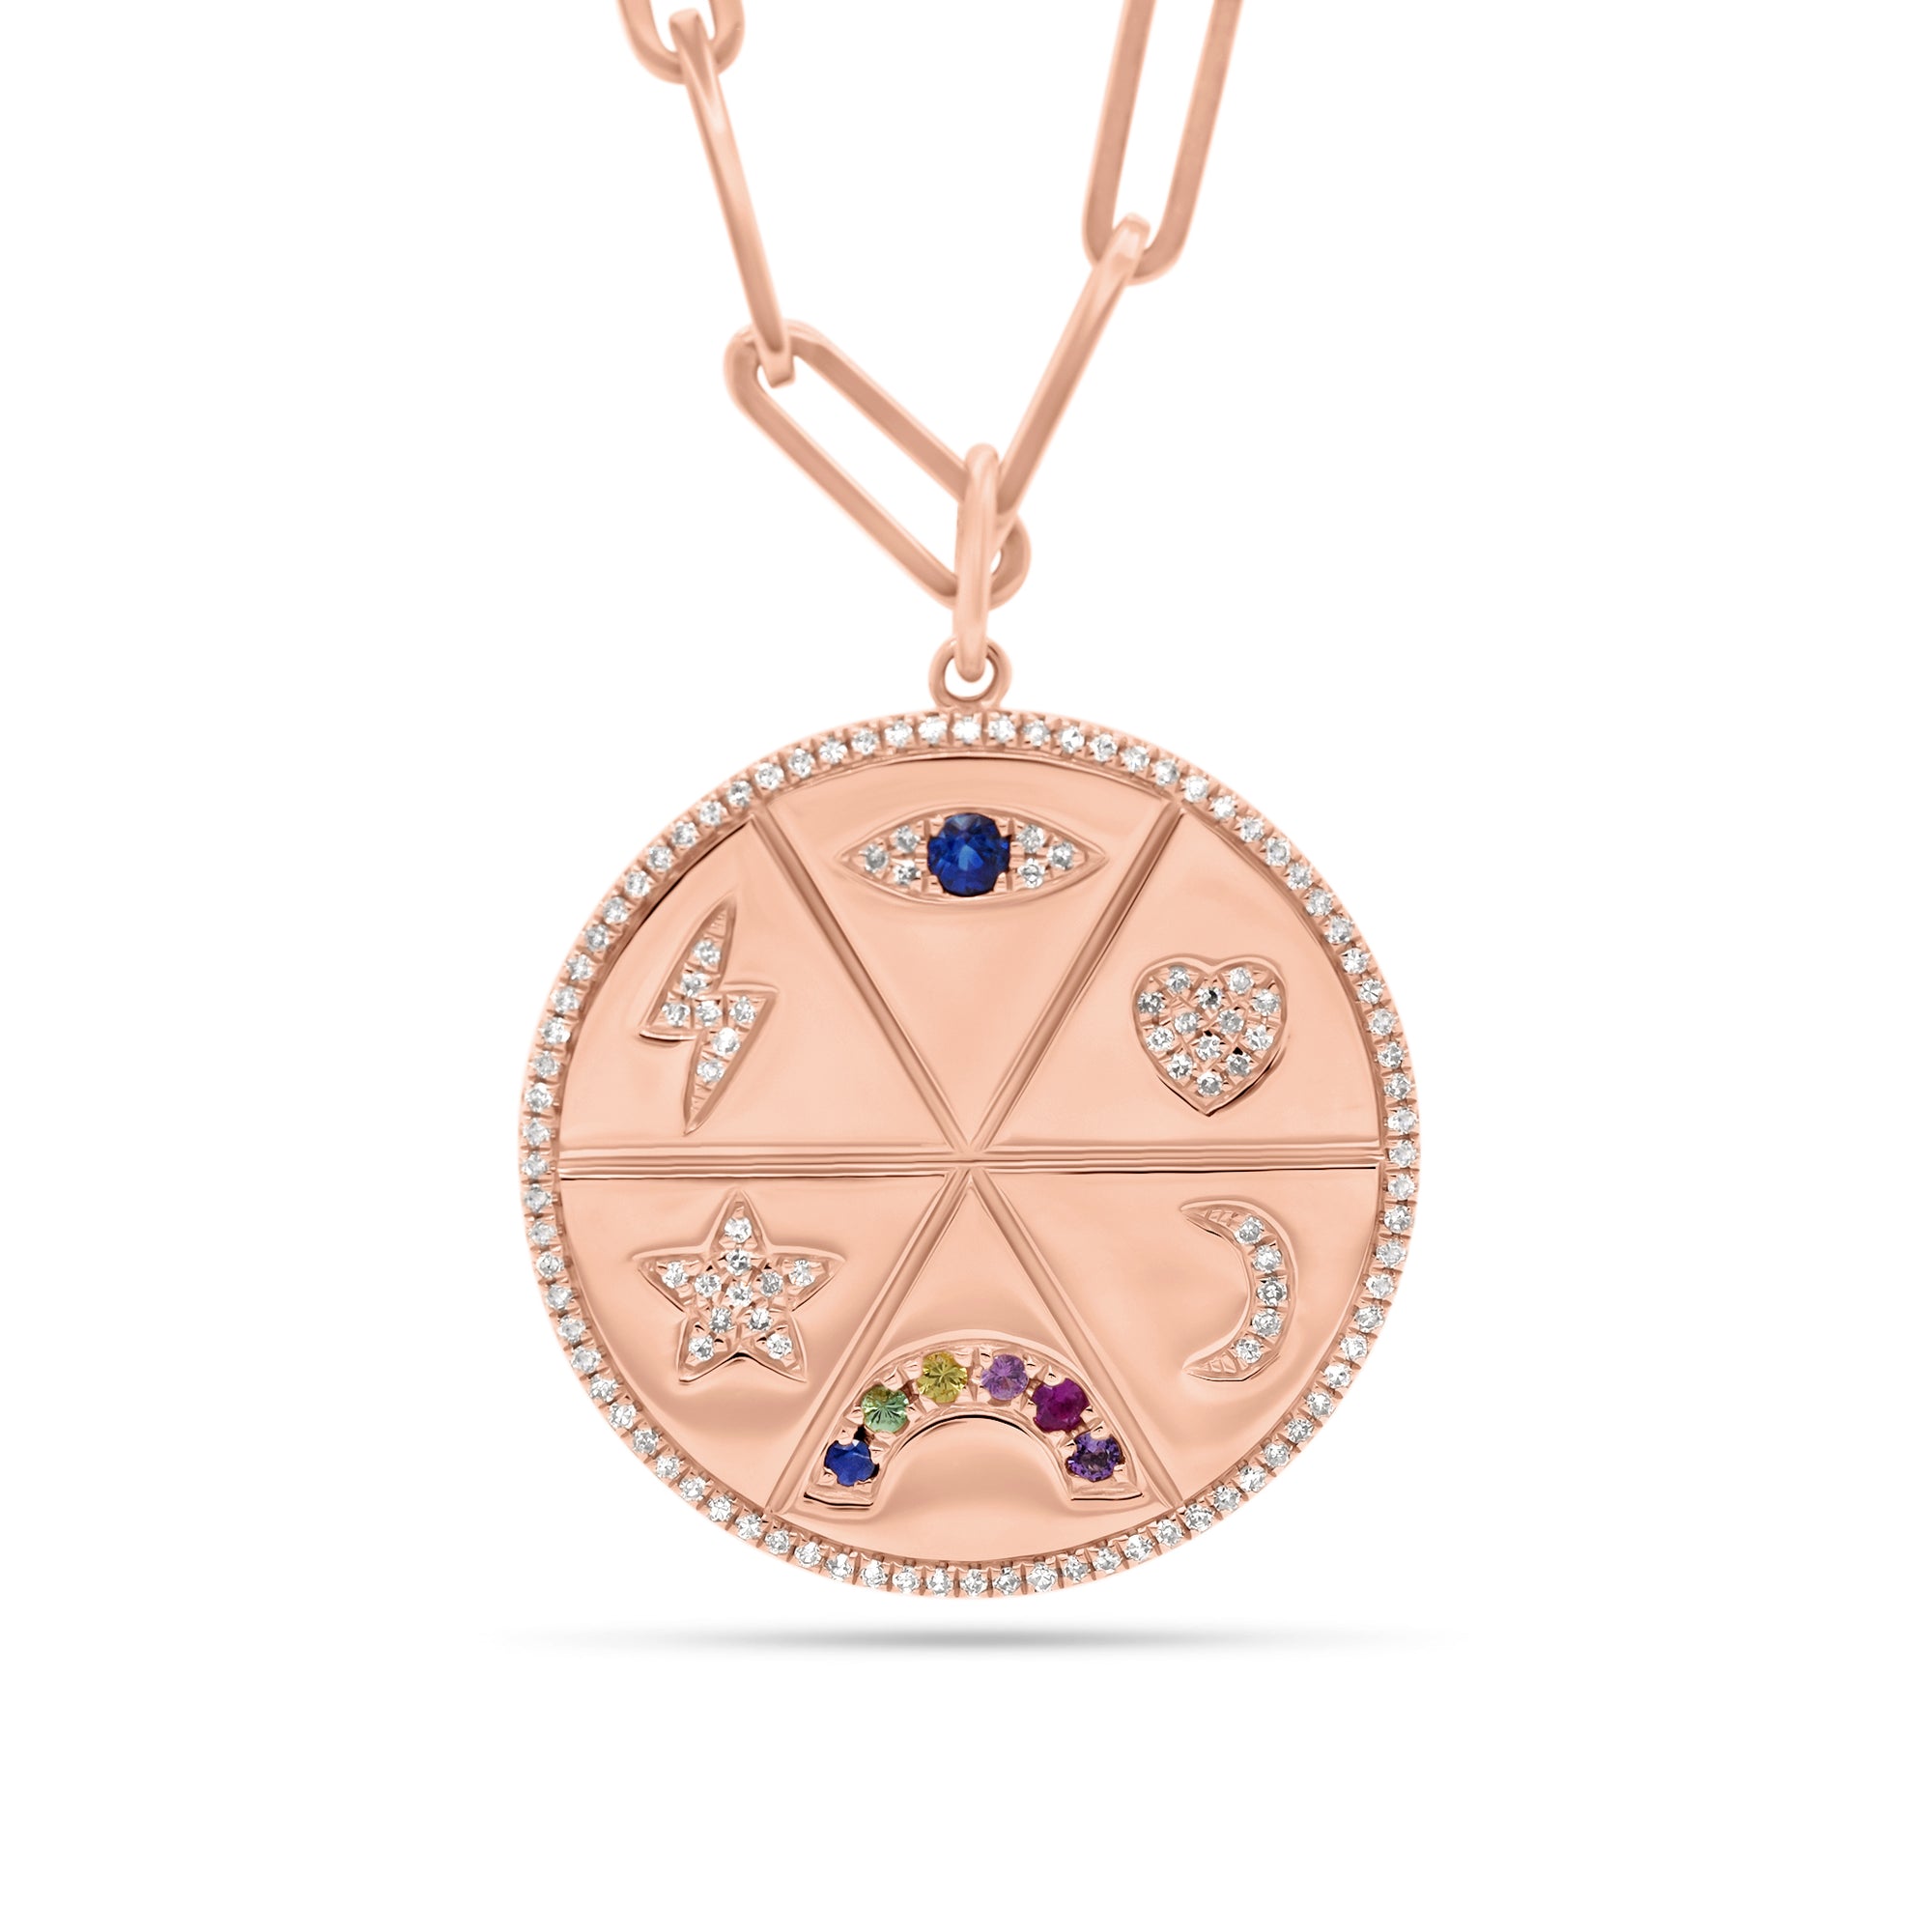 Diamond & Multicolor Gemstone Lucky Symbols Large Disc Pendant - 14K gold weighing 8.48 grams - 122 round diamonds totaling 0.34 carats - 7 multicolor gemstones totaling 0.22 carats. 